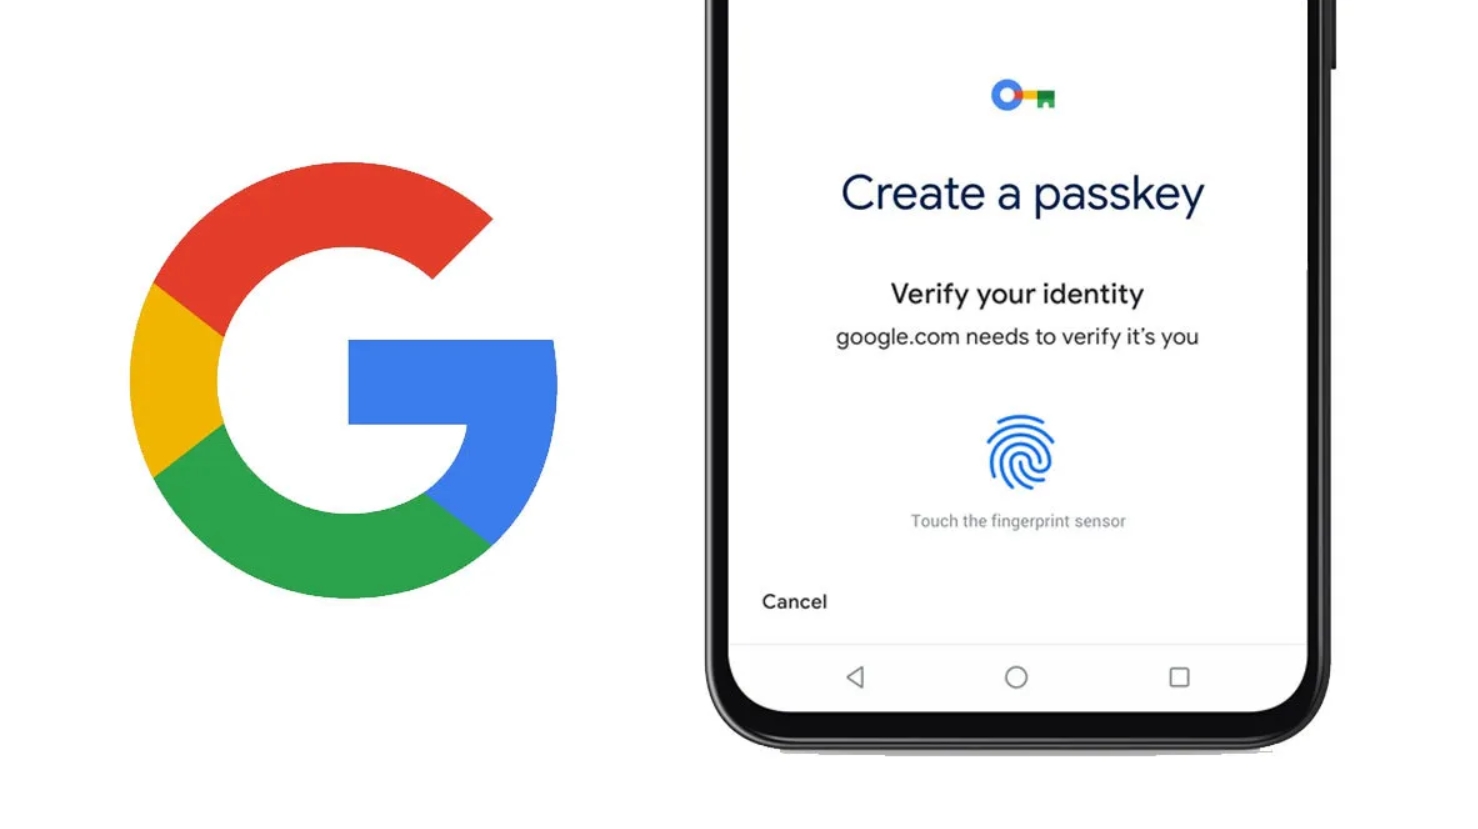 Google is making passkeys the default option for personal accounts